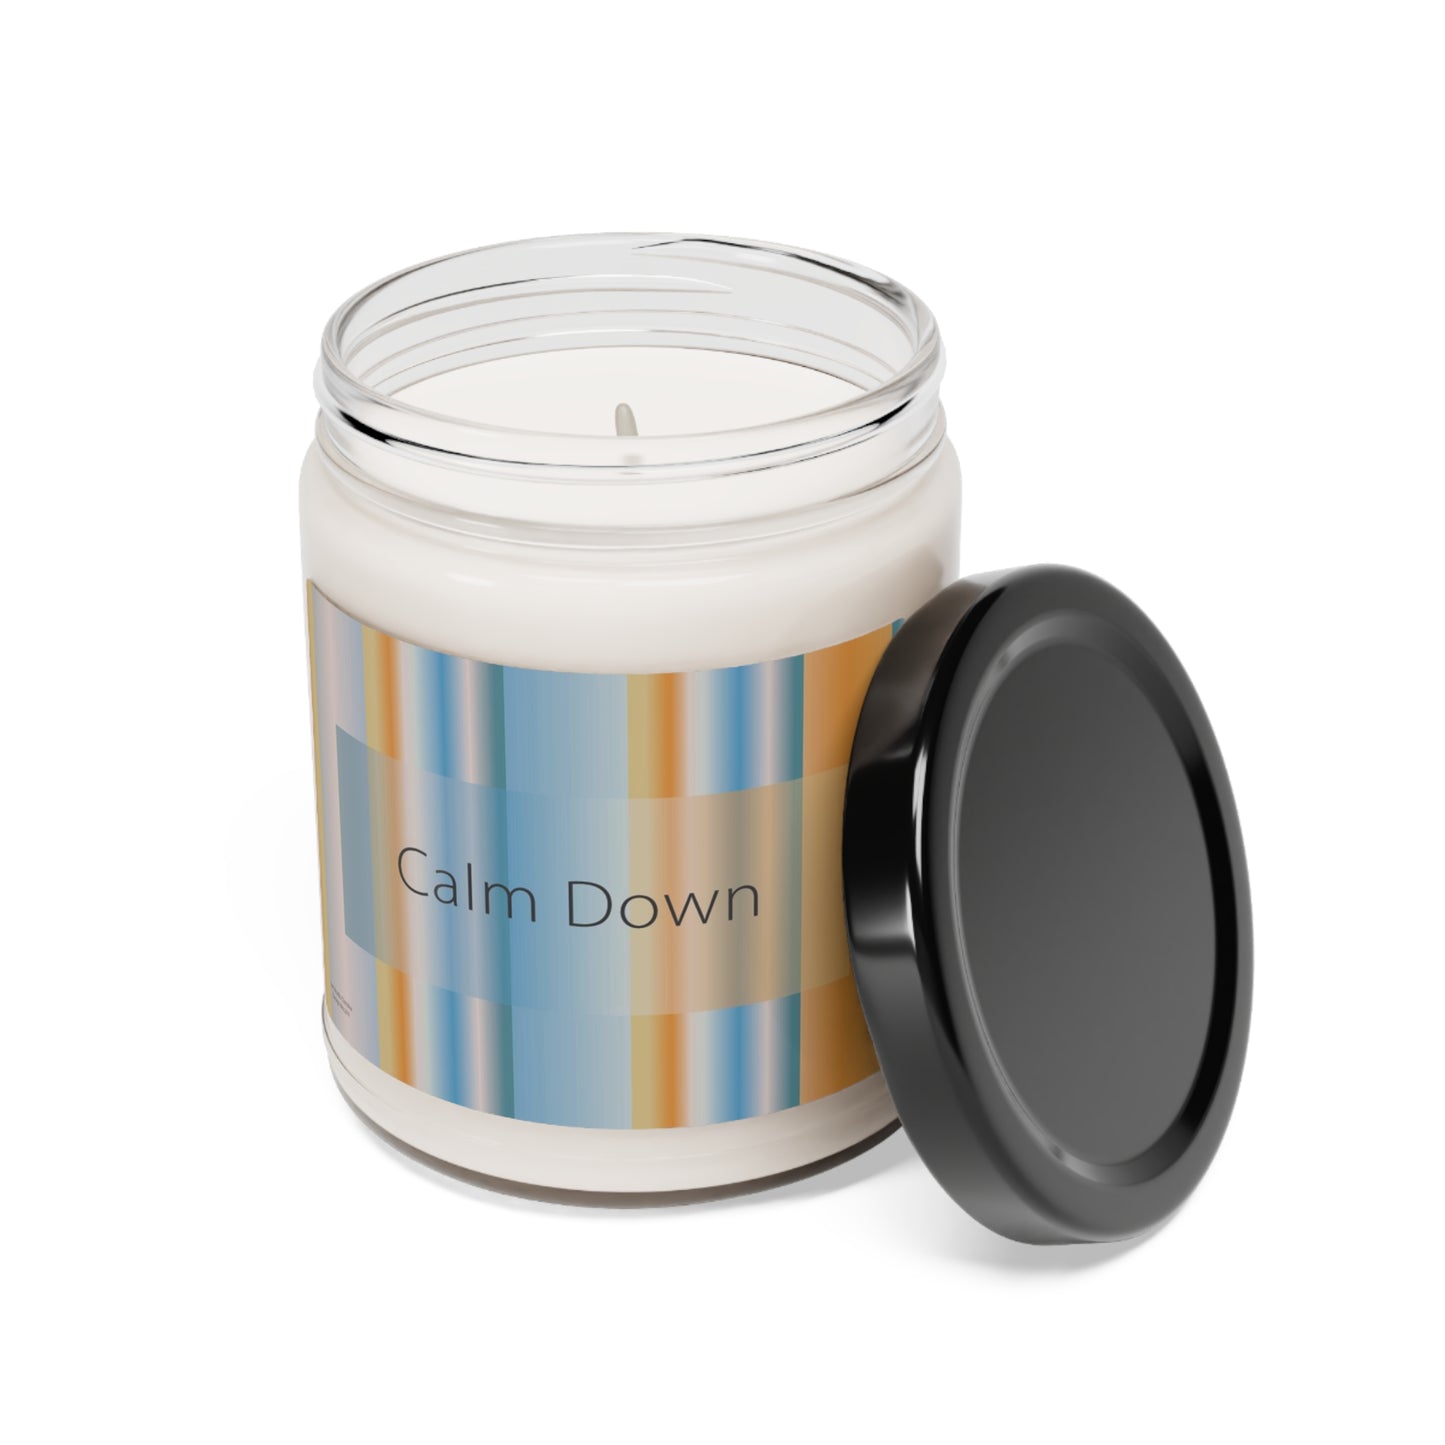 Scented Soy Candle, 9oz Calm Down - Design No.201